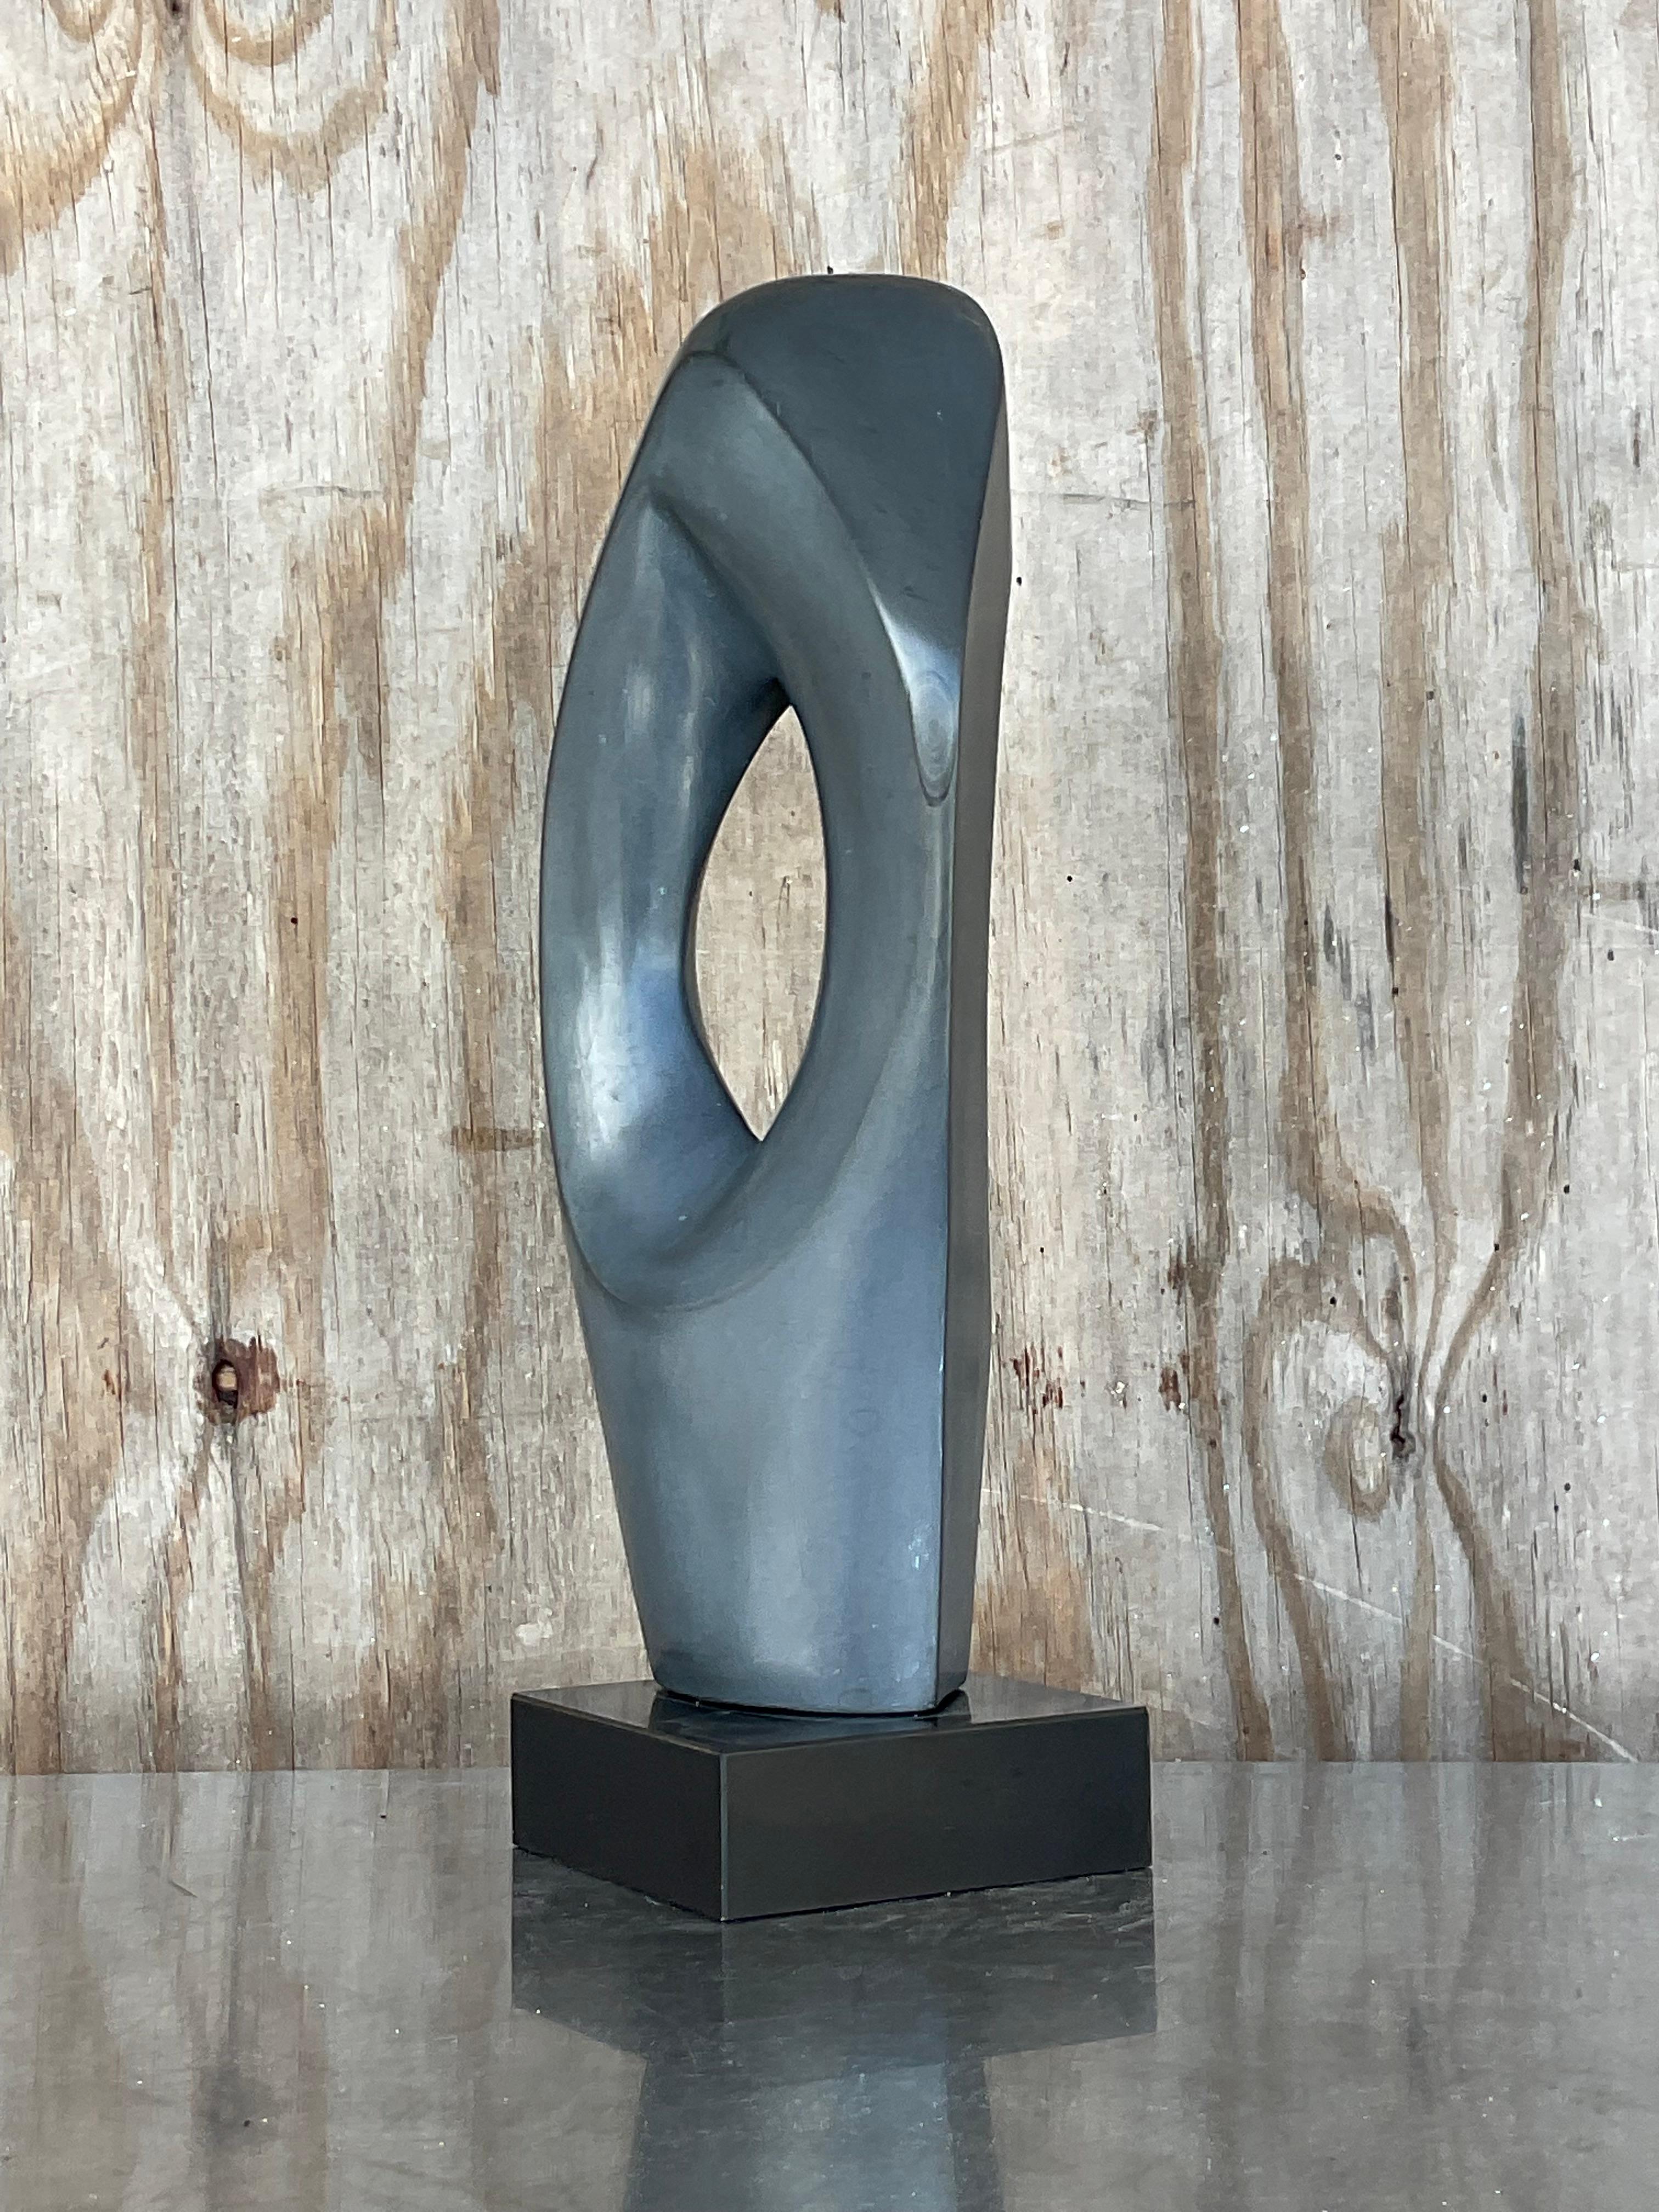 A fabulous vintage abstract sculpture. A beautiful organic shape in a dark charcoal grey. Unsigned. Acquired from a Palm Beach estate.